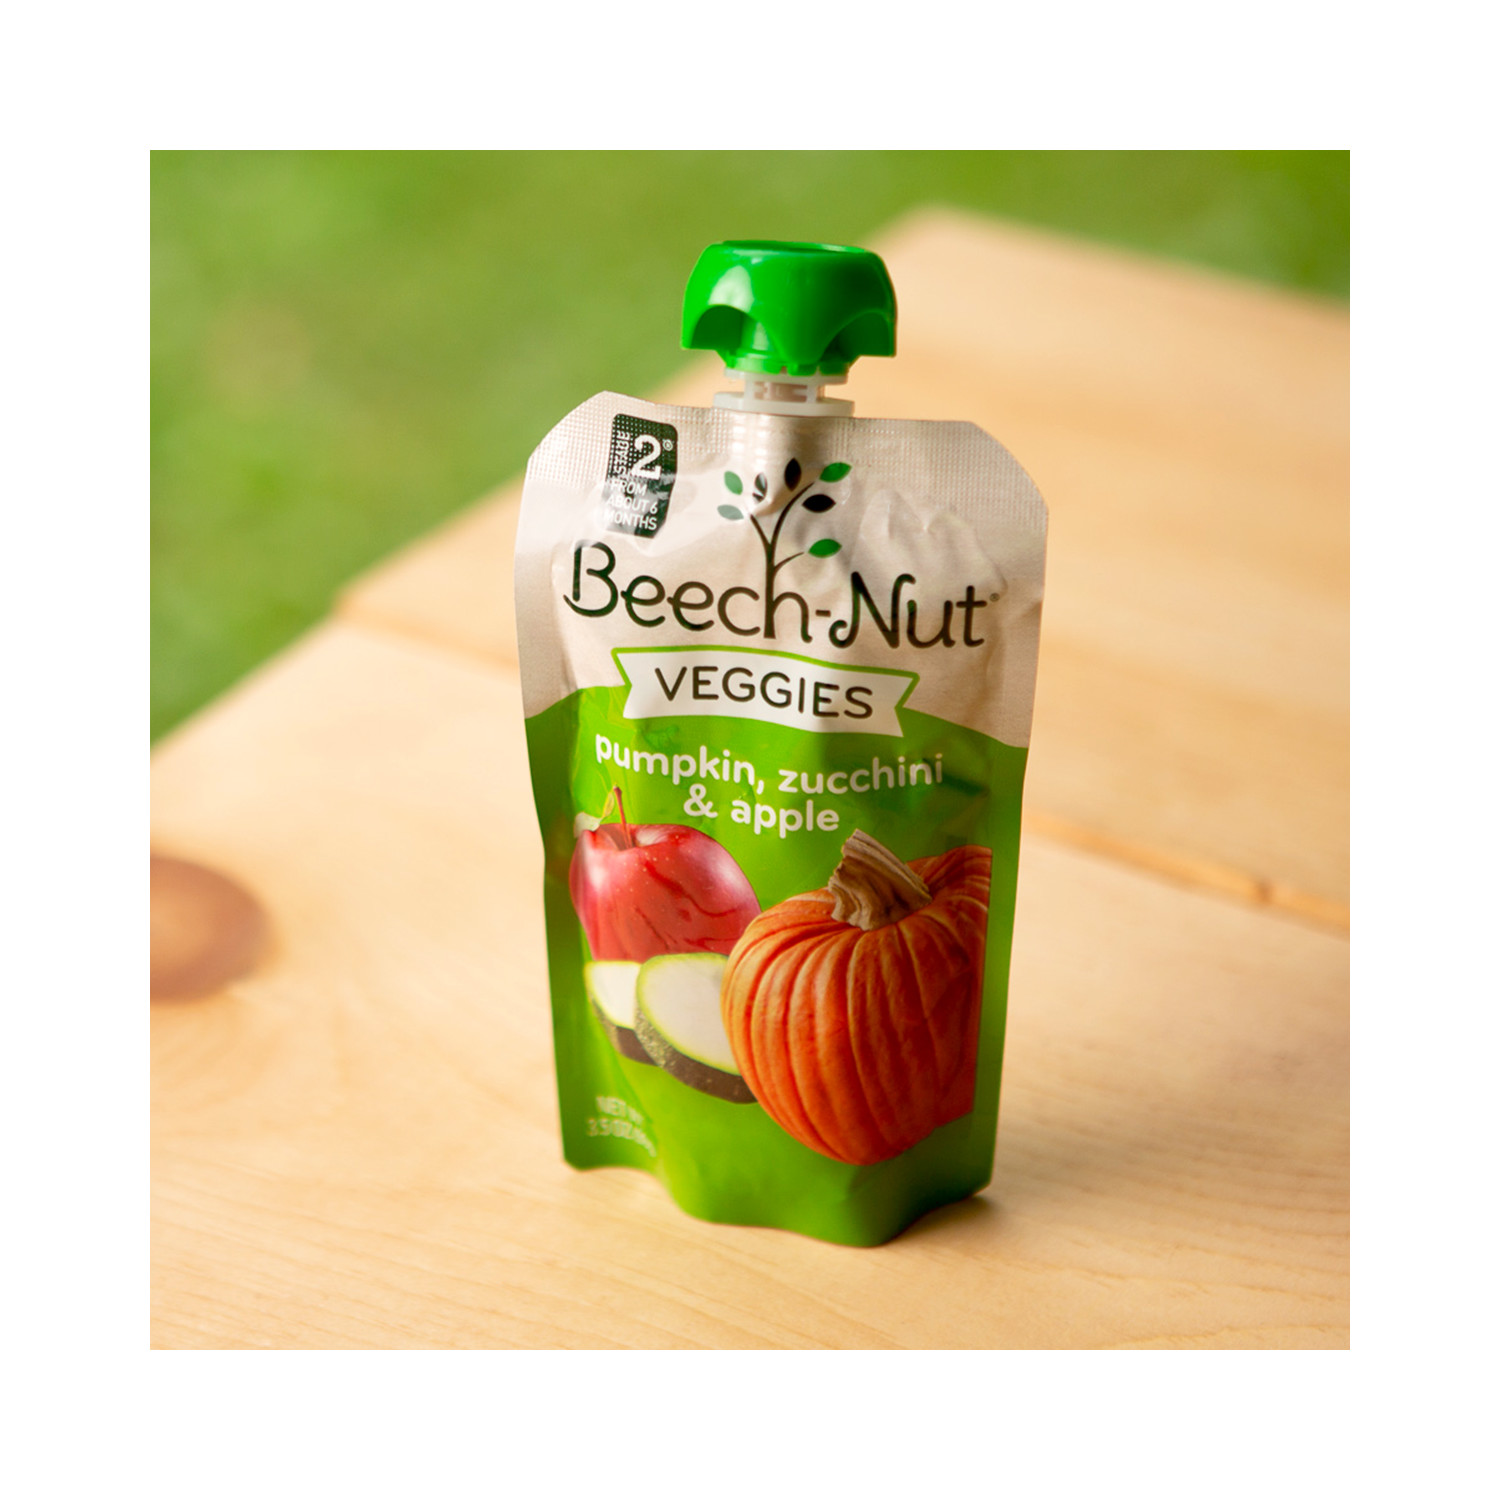 Beech-Nut Veggies Stage 2 Baby Food Variety Pack, 3.5 oz Pouch (9 Pack) - image 2 of 3